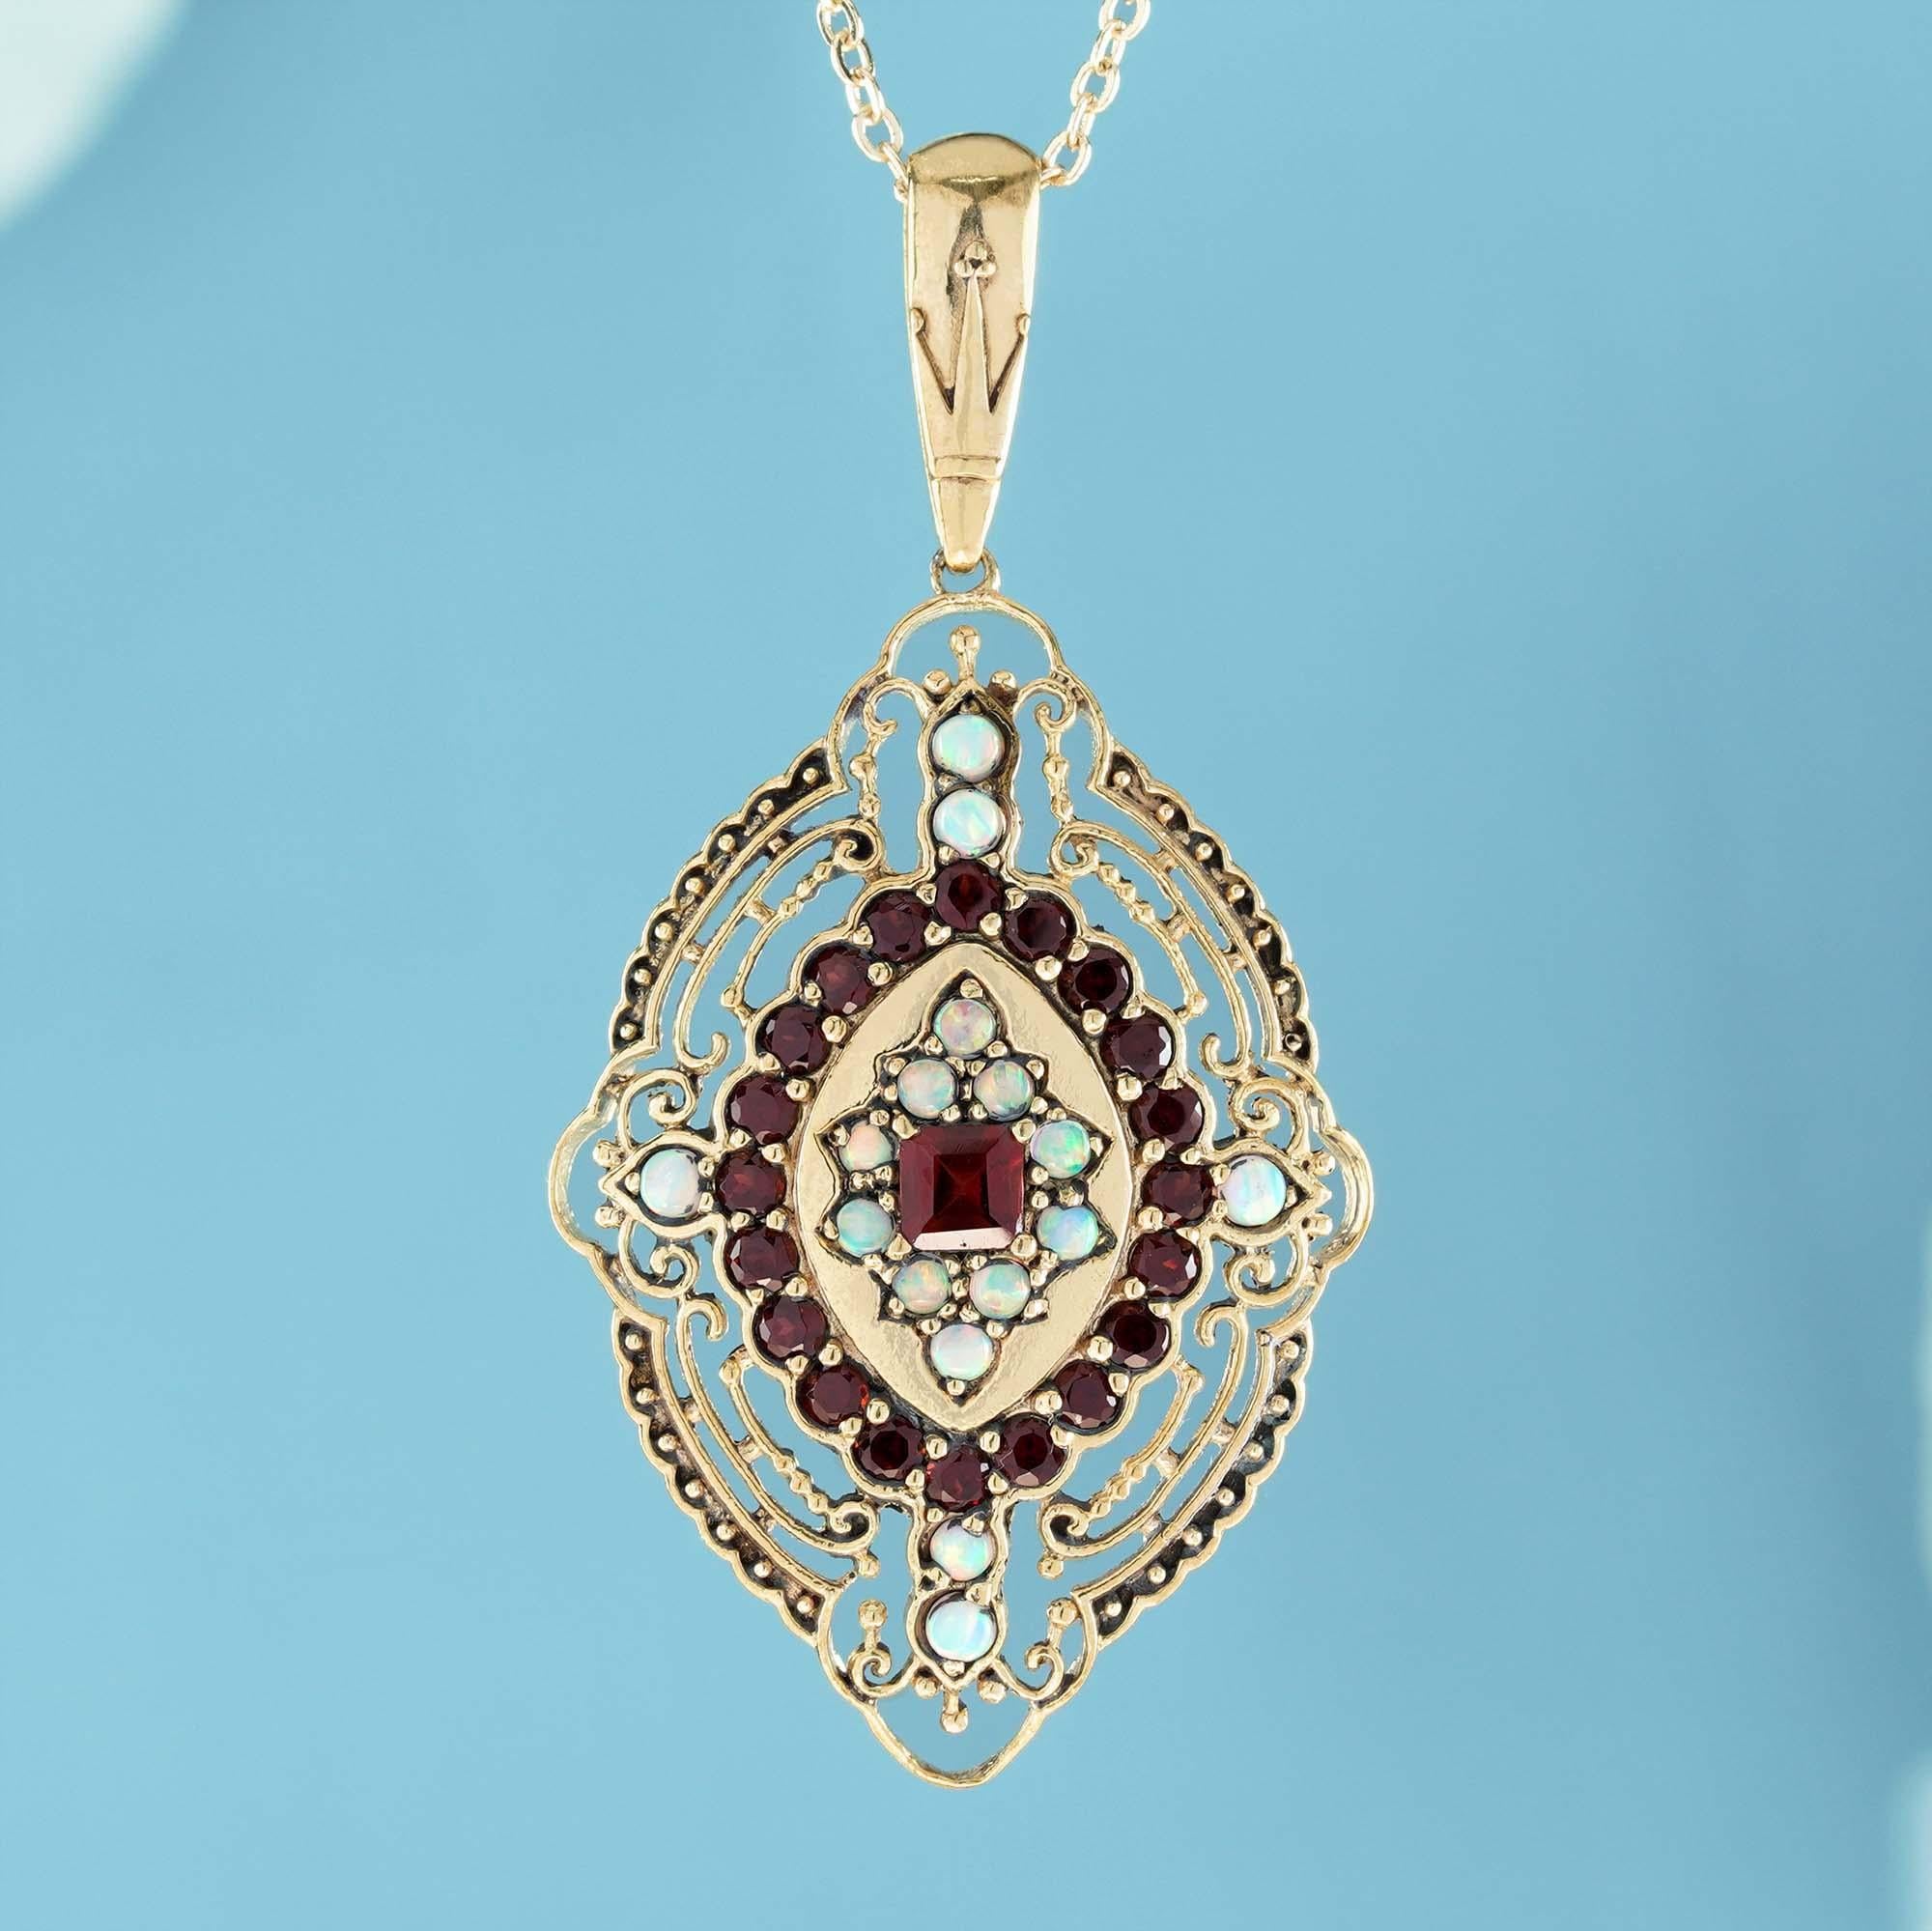 Honoring the memoir of timeless, antique jewelry. The pendant is set delicately and ornately in a yellow gold, with scrolls and flourishes of the filigree that echo the square shape of the red garnet gemstone in the center. surrounded by opal and